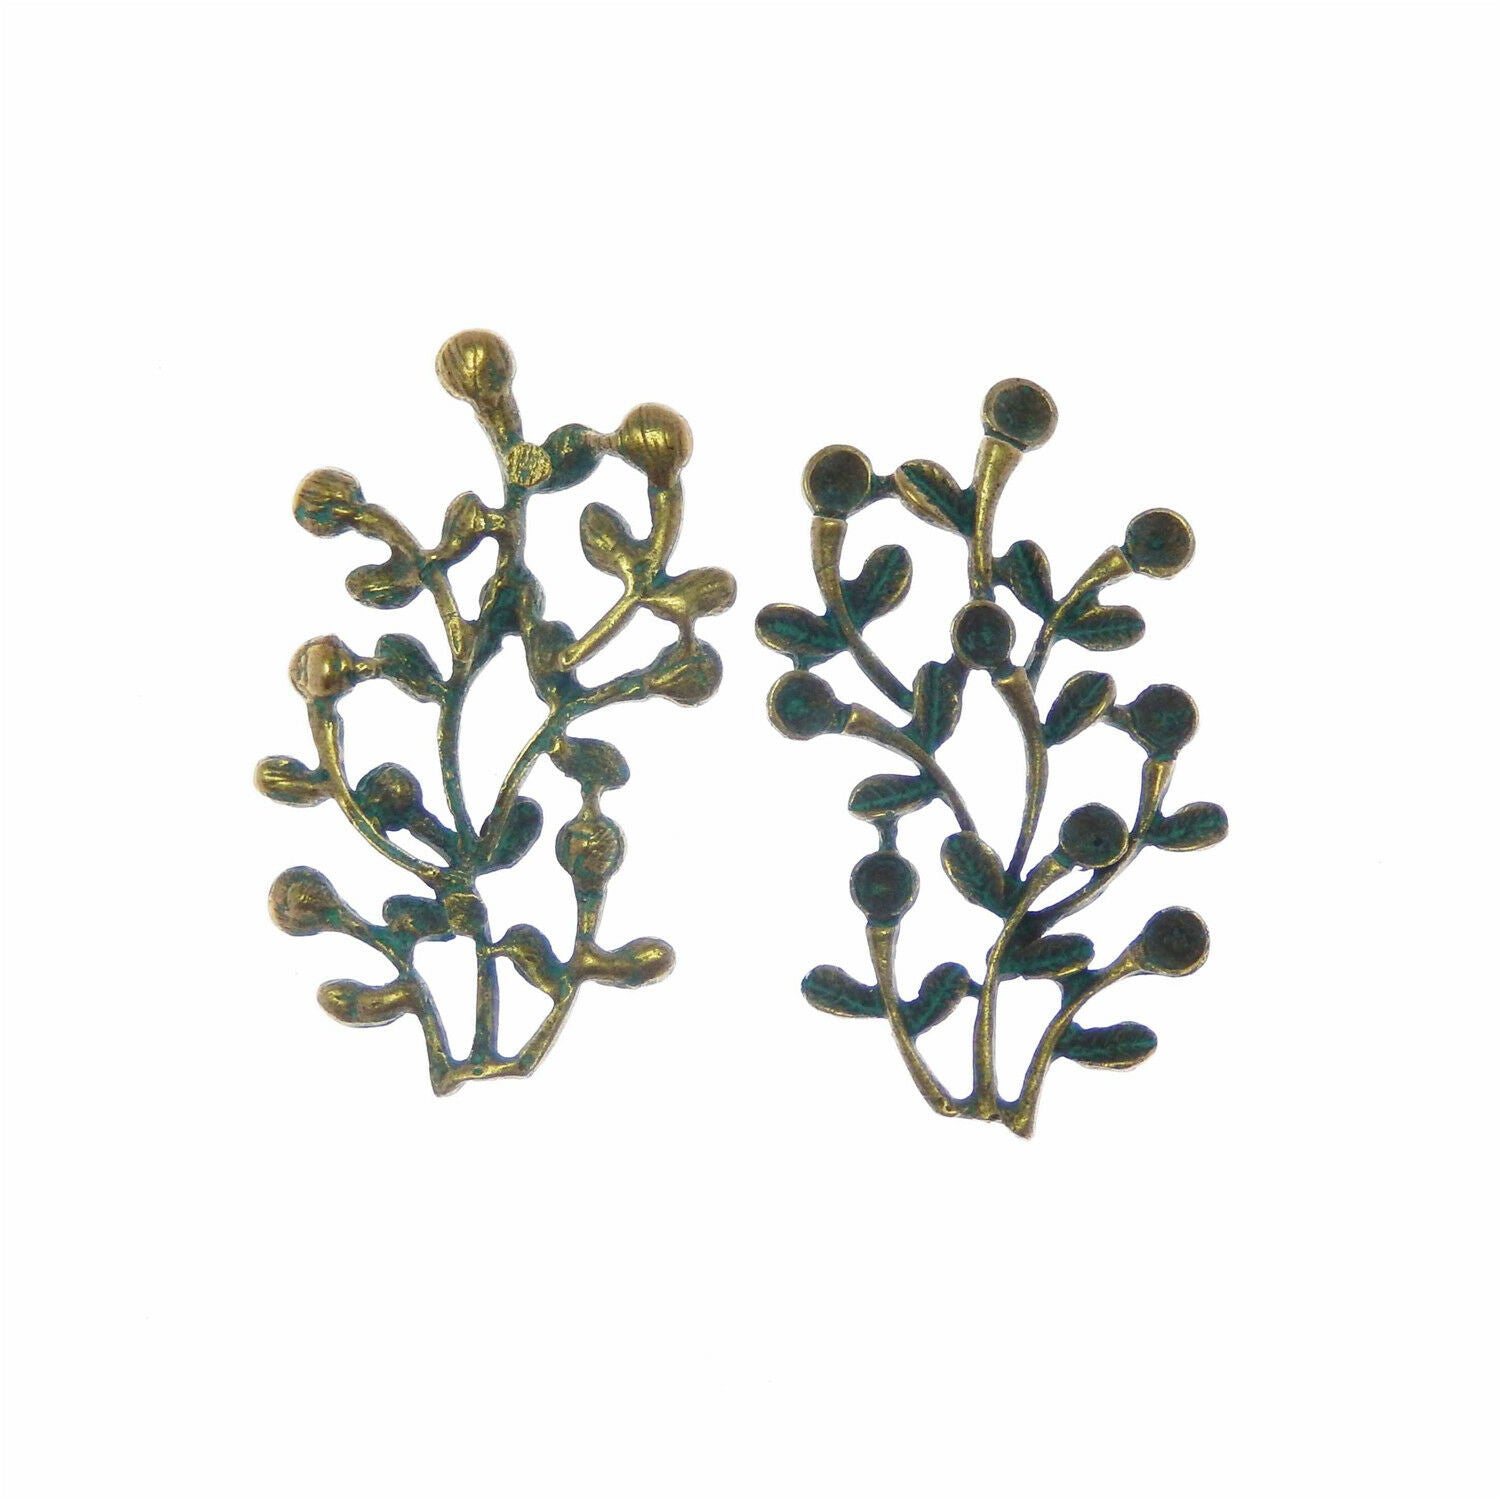 10 pcs Antiqued Copper Green Ivy Vine Look Charms Pendant Crafts 58x35mm 52295